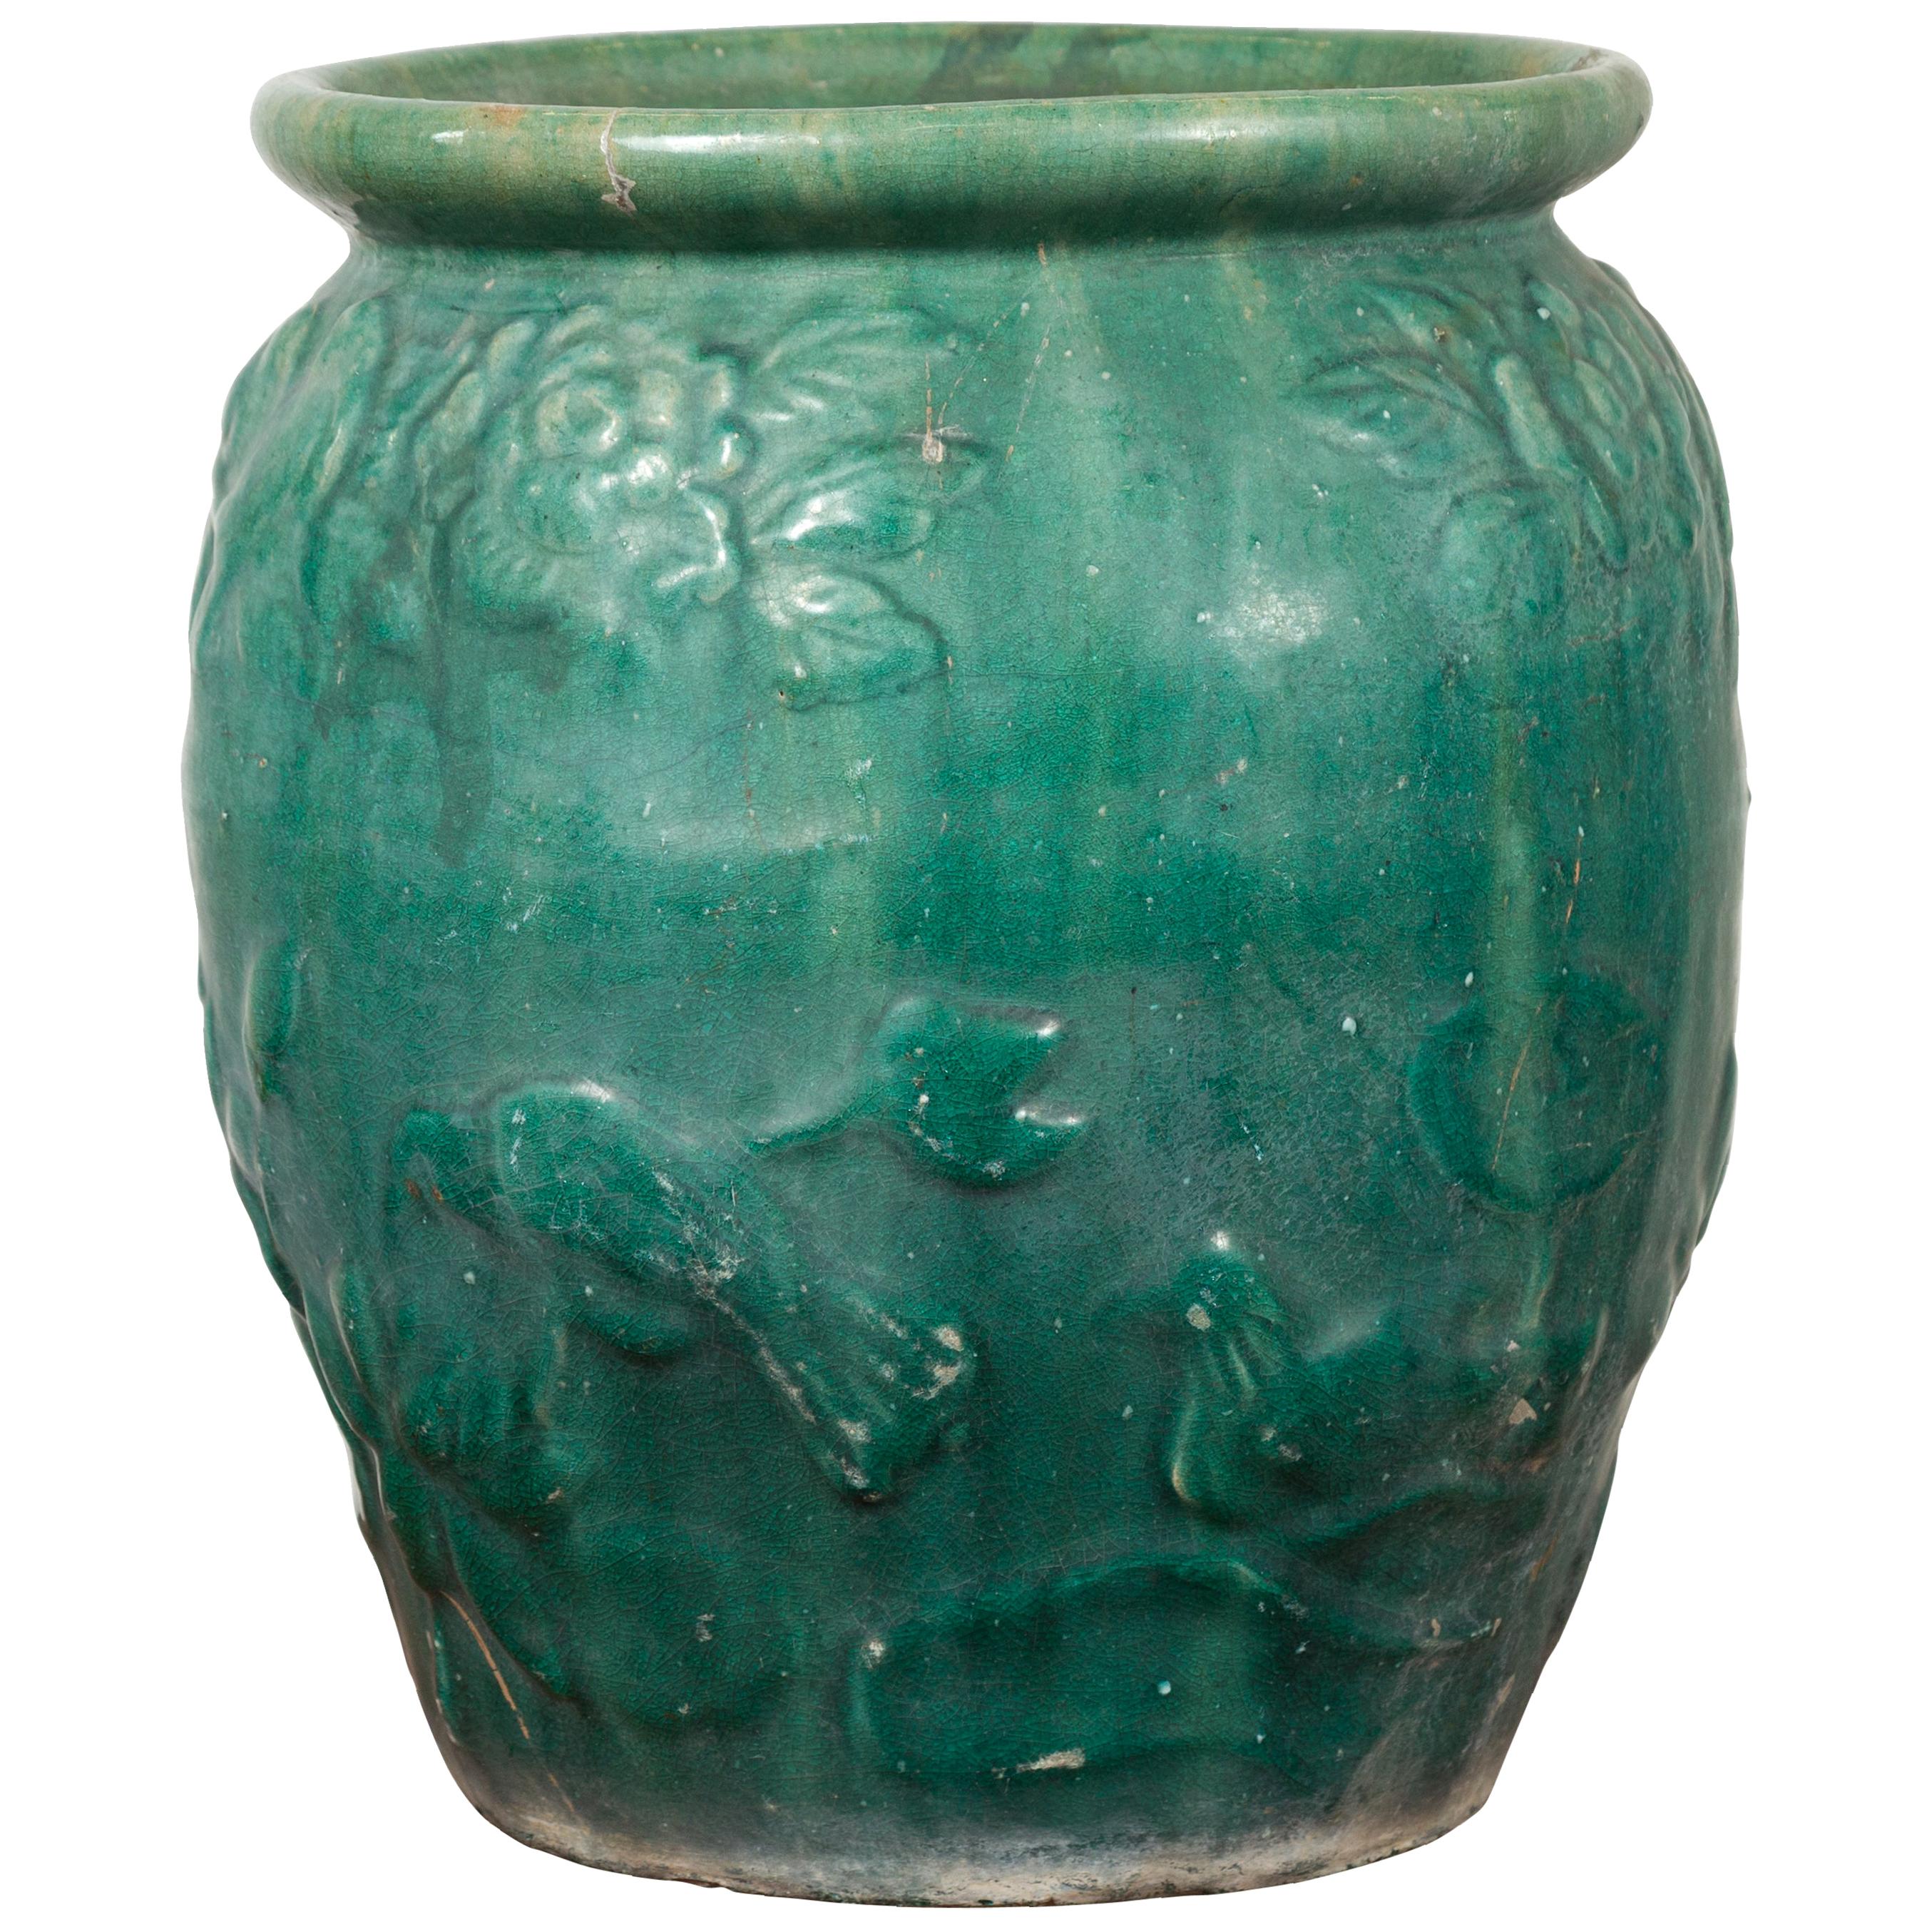 Chinese Vintage Green Glazed Vase with Raised Floral and Bird Motifs